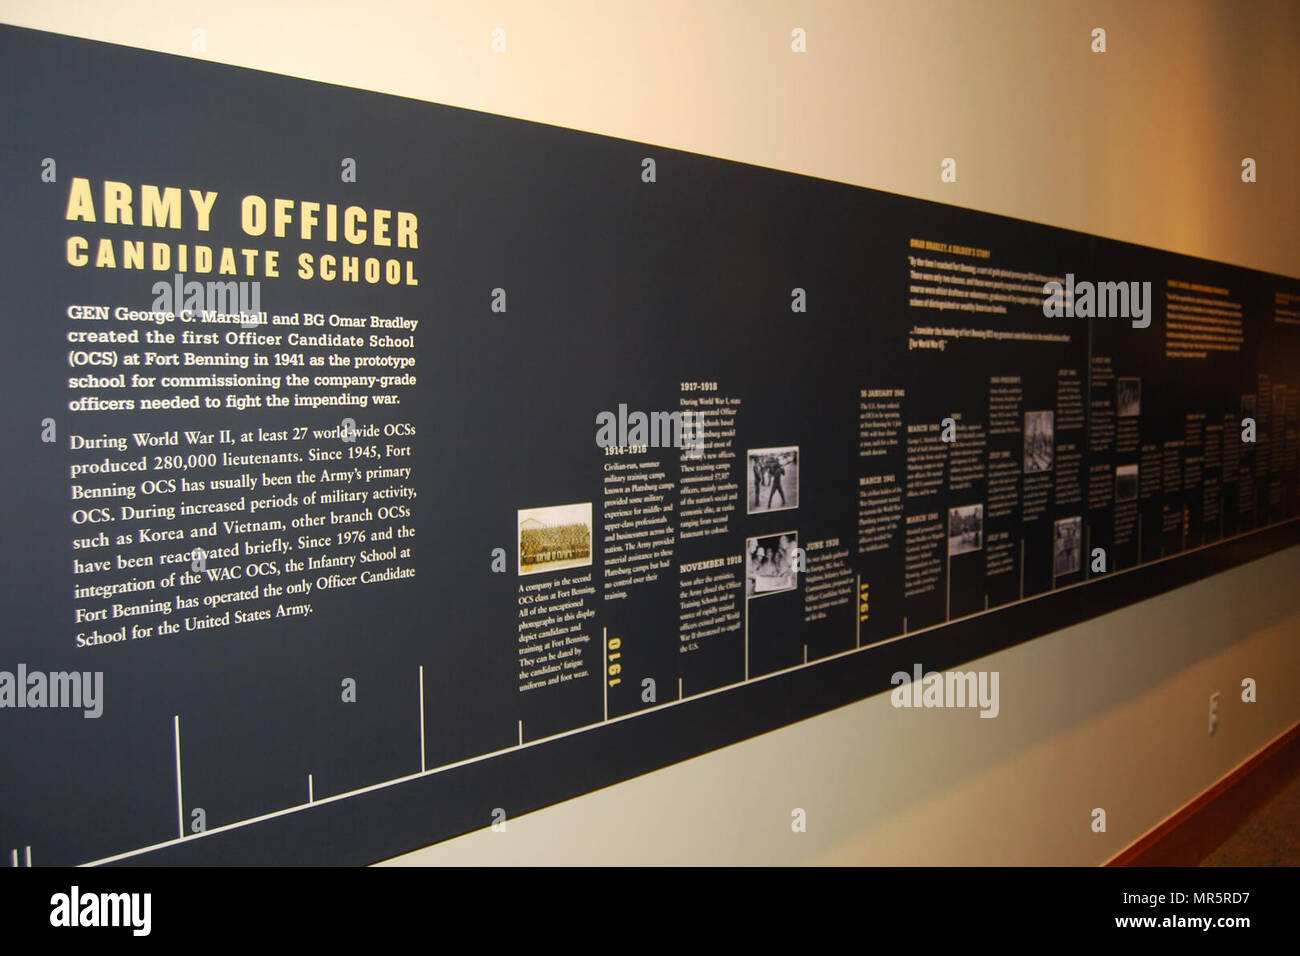 Info and photo from the National Infantry Museum website "Established